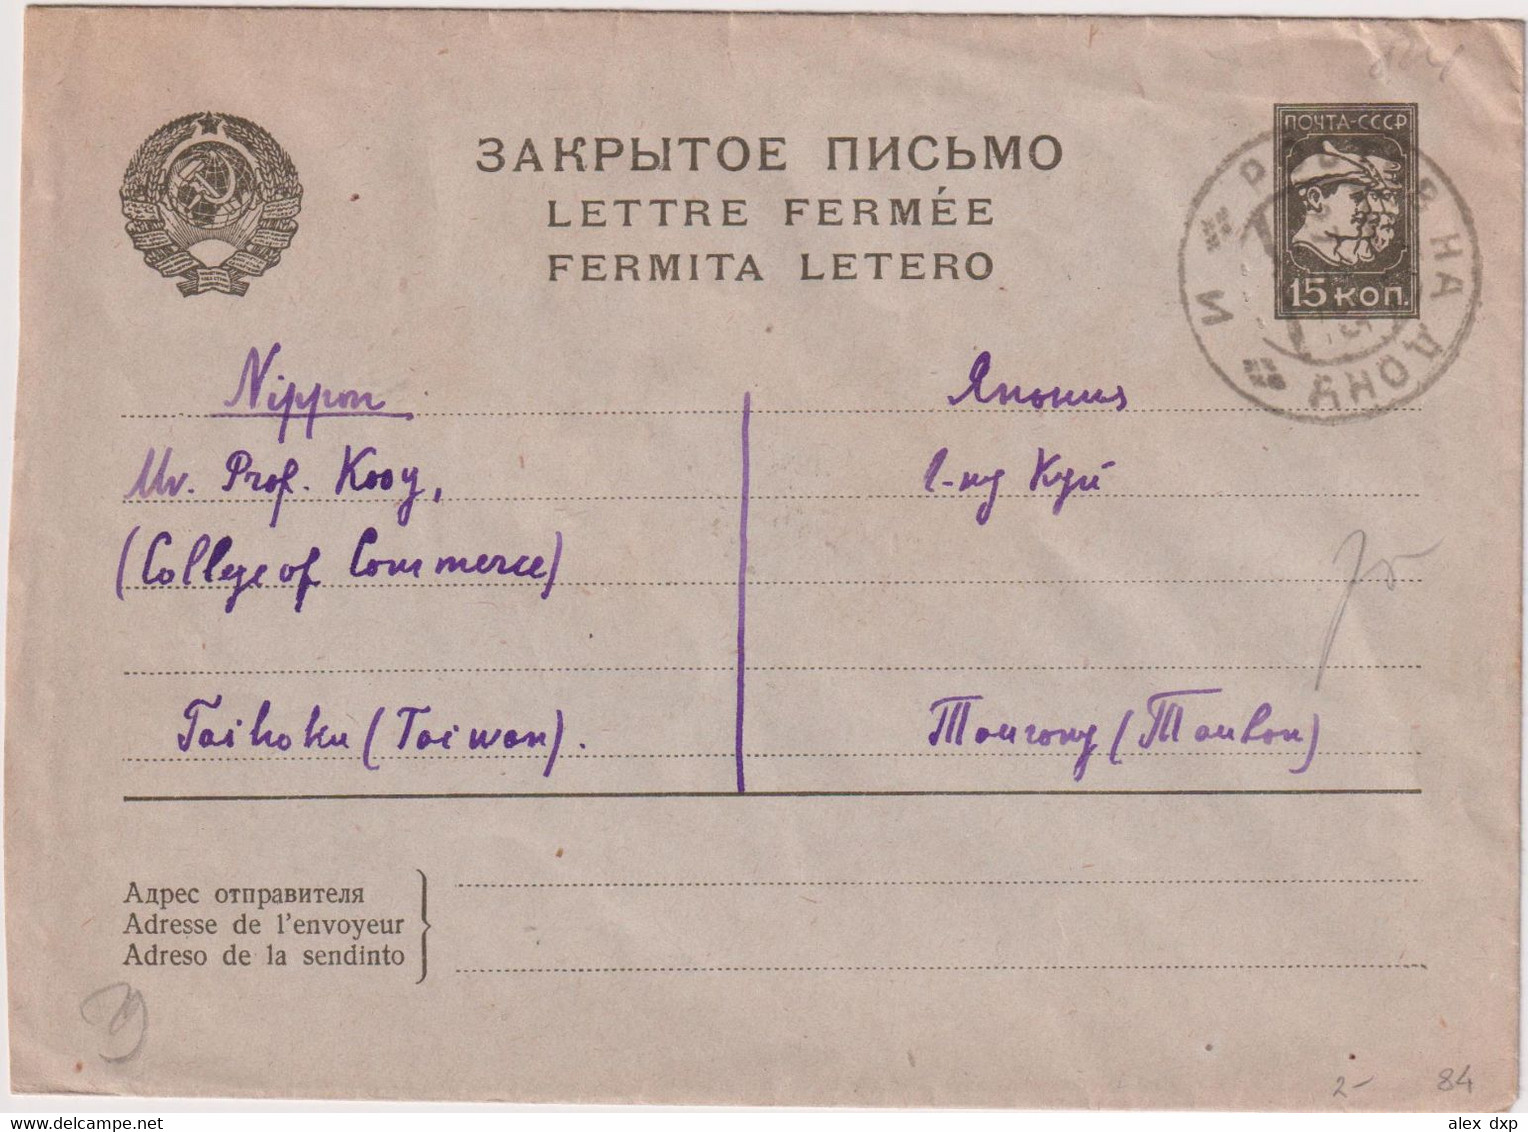 RUSSIA (USSR) > 1935 POSTAL HISTORY > CLOSED LETTER STATIONARY COVER TO TAIWAN (PERIOD OF JAPANESE OCCUPATION) - Lettres & Documents